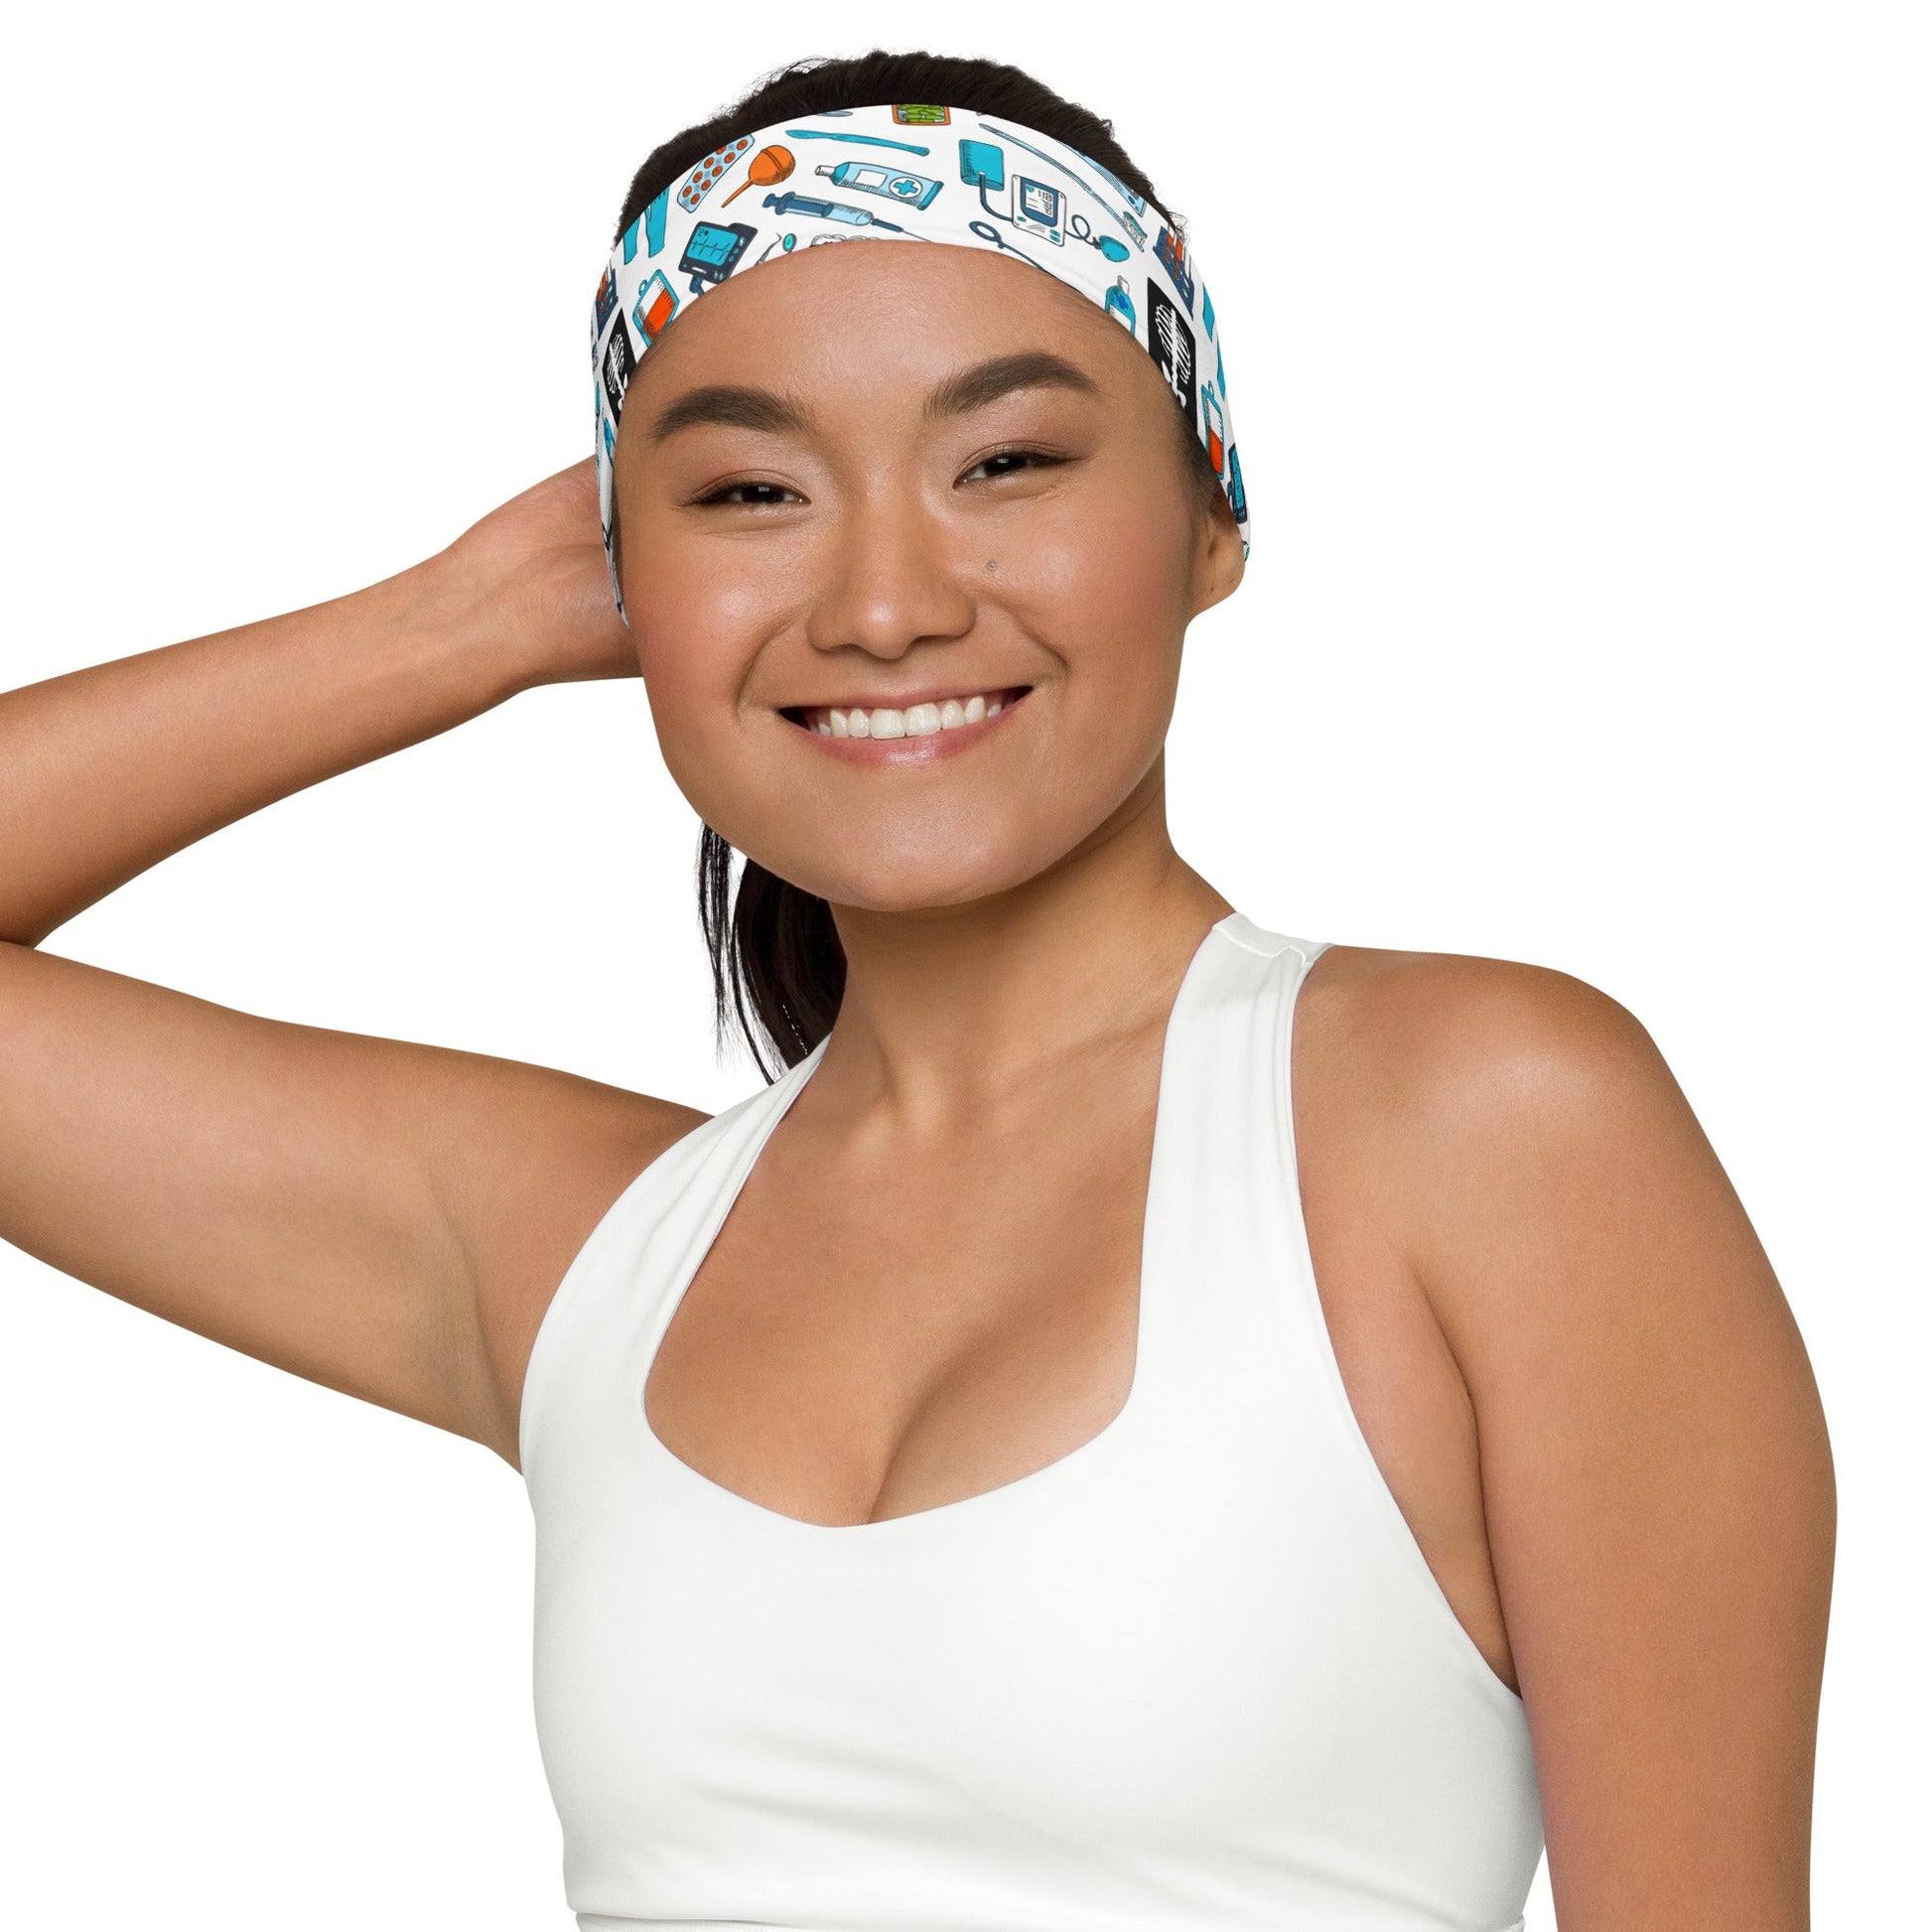 Stretchy Headbands - Medical accessory pattern - White and Blue - Medical Arts Shop